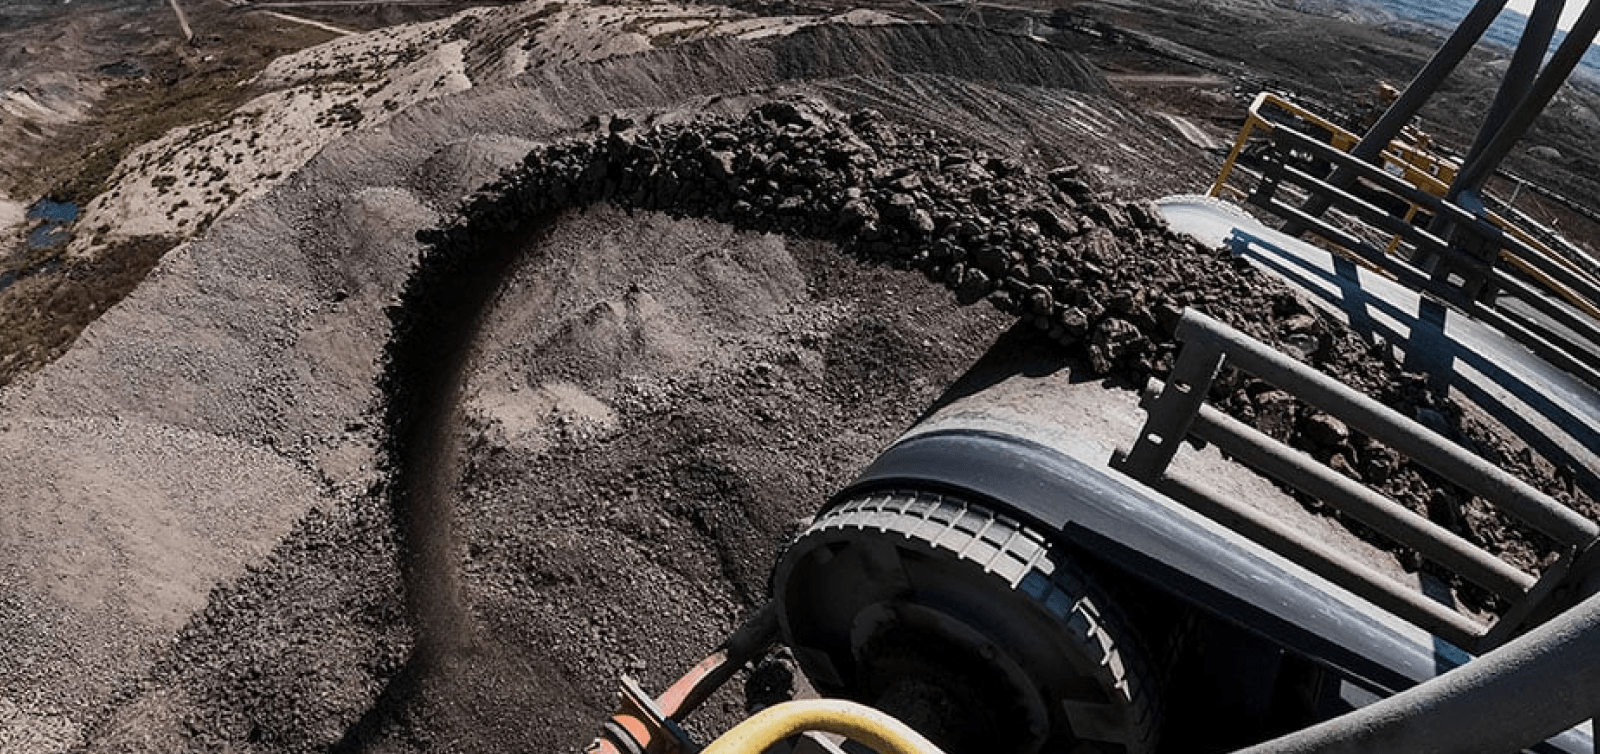 Blog - How Computer Vision is Boosting the Mining Industry’s Productivity